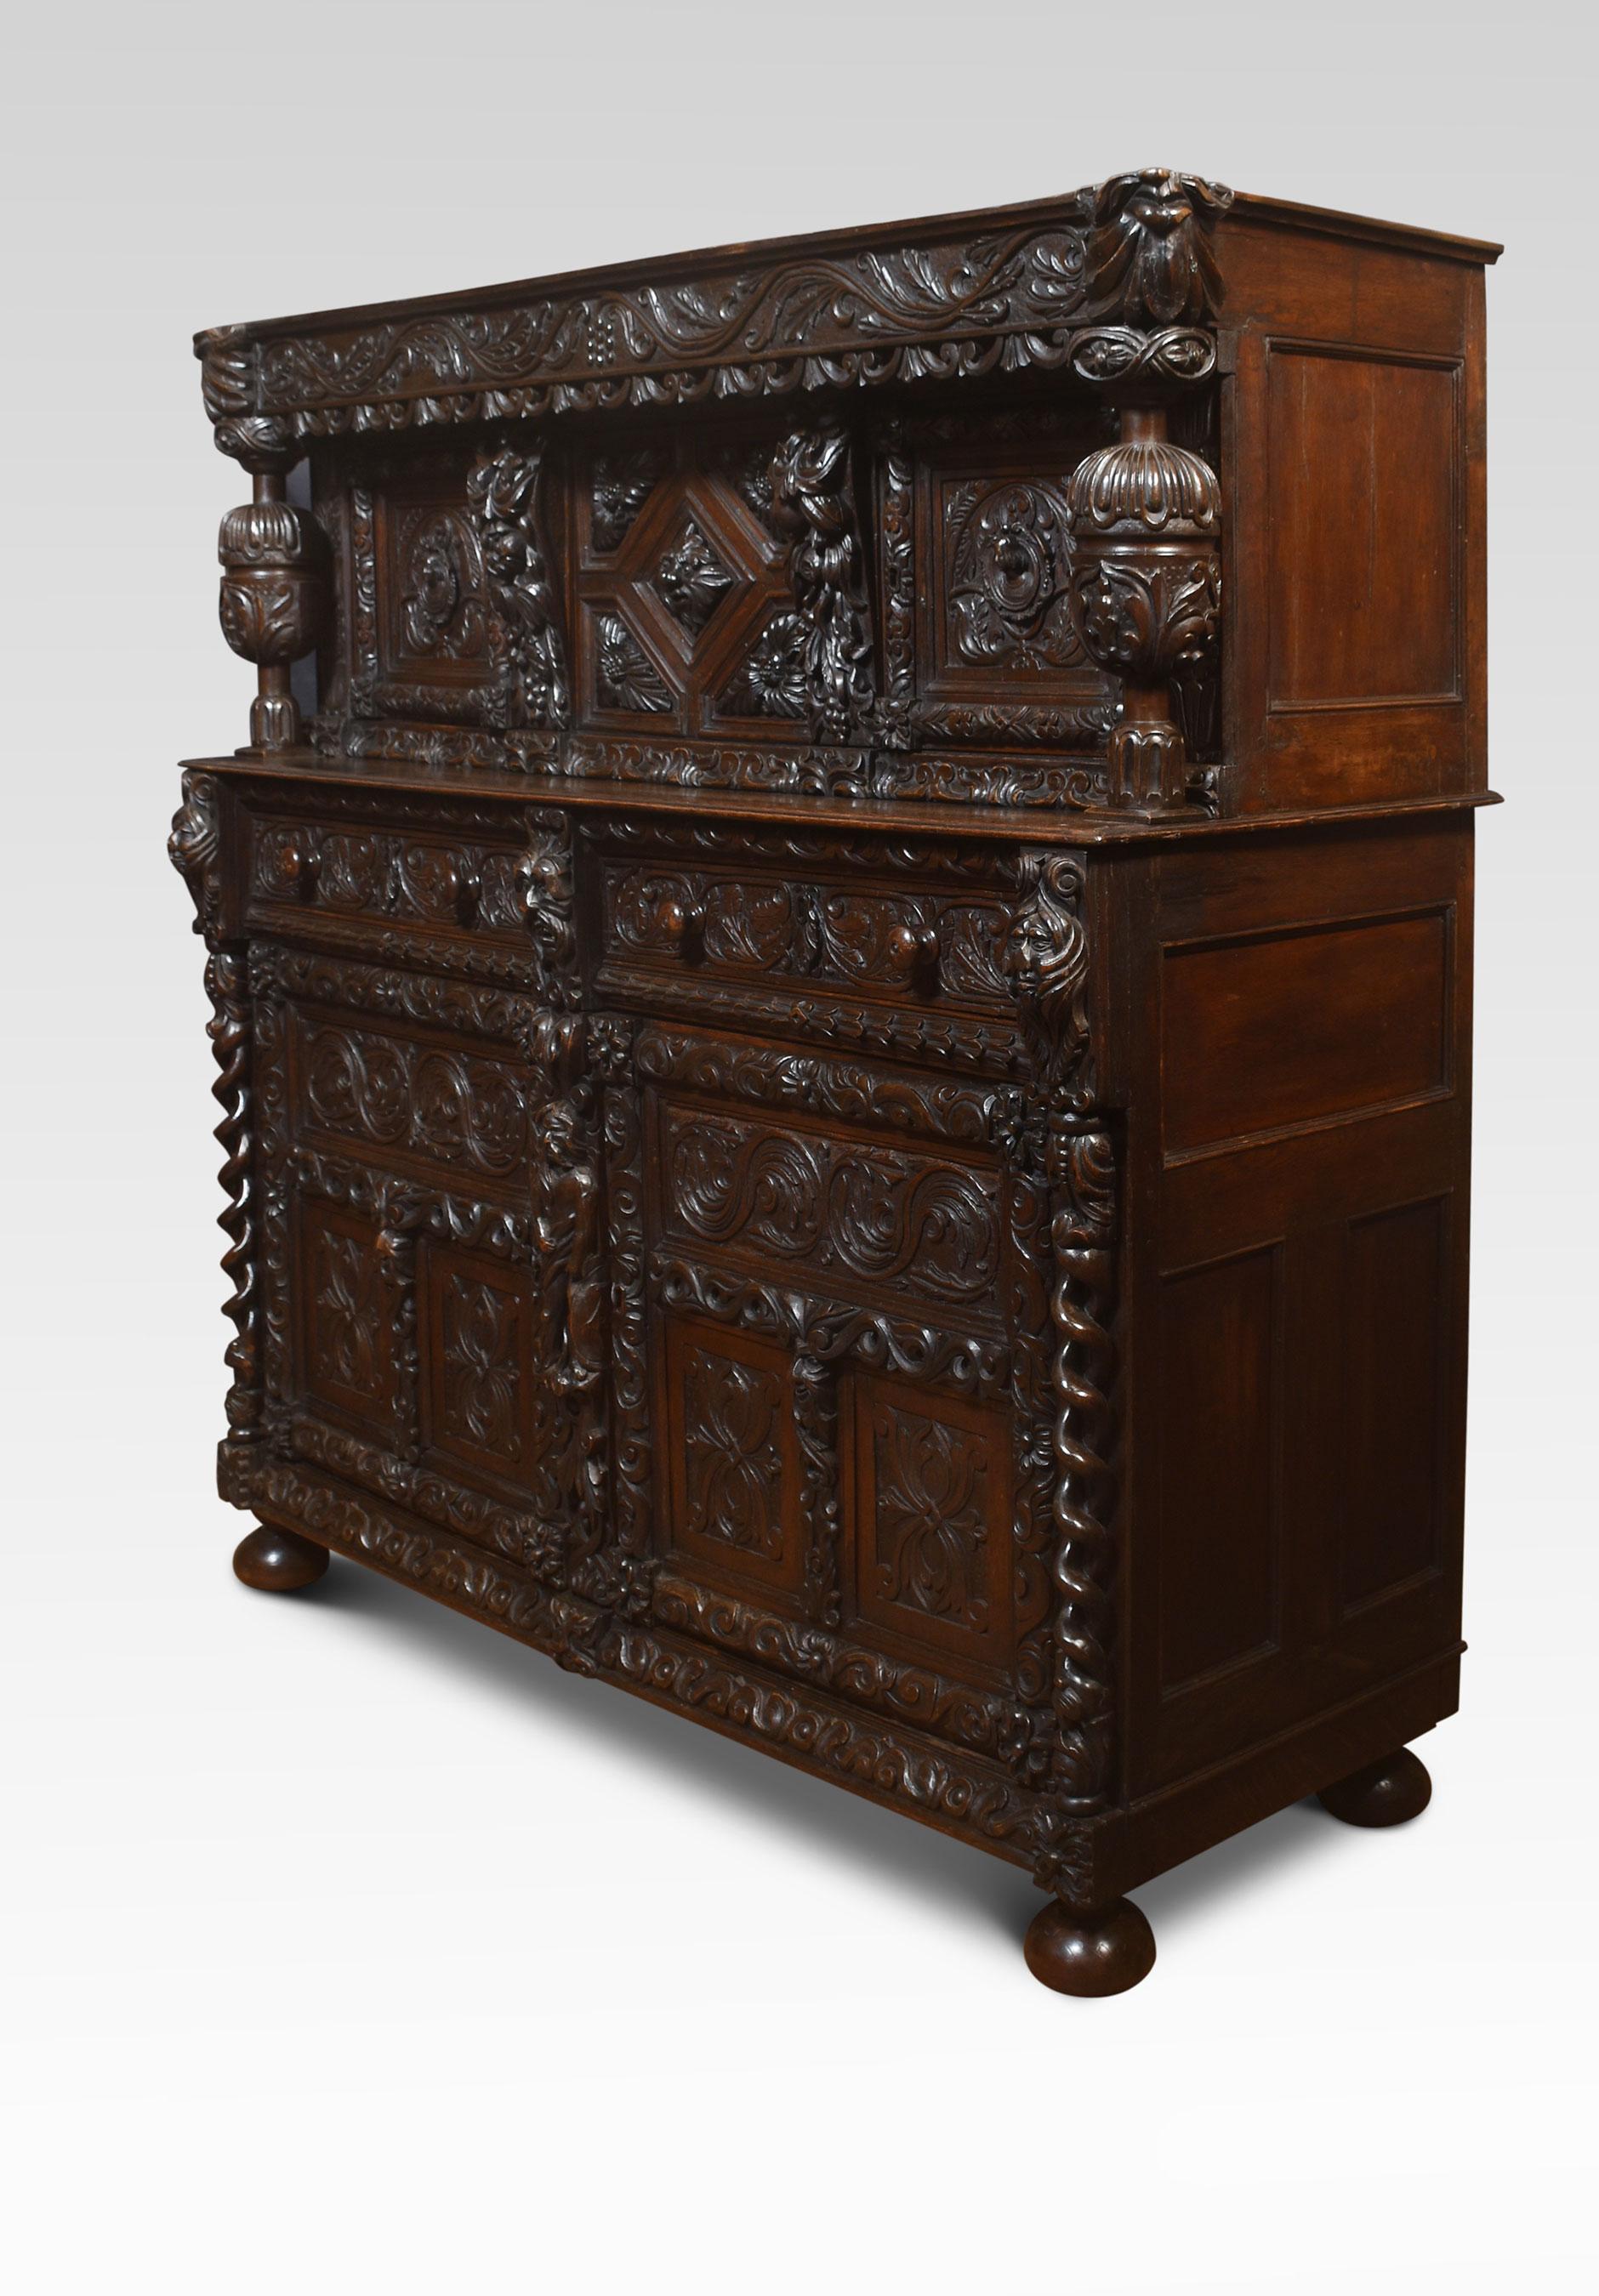 19th Century Fine Old Oak Profusely Carved Court Cupboard in Elizabethan Manor